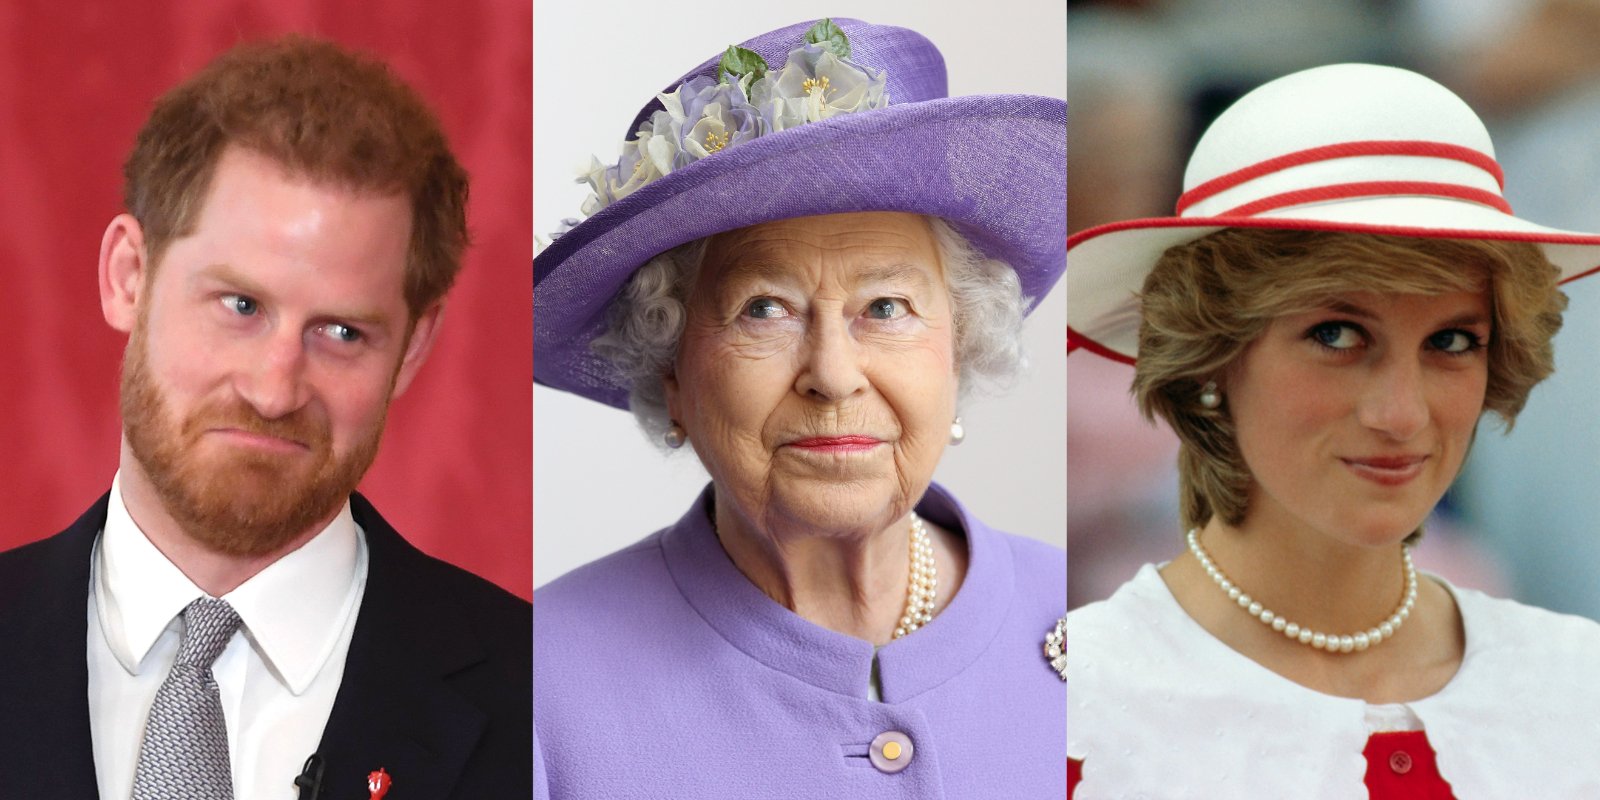 Prince Harry, Queen Elizabeth II and Princess Diana in side-by-side photographs.